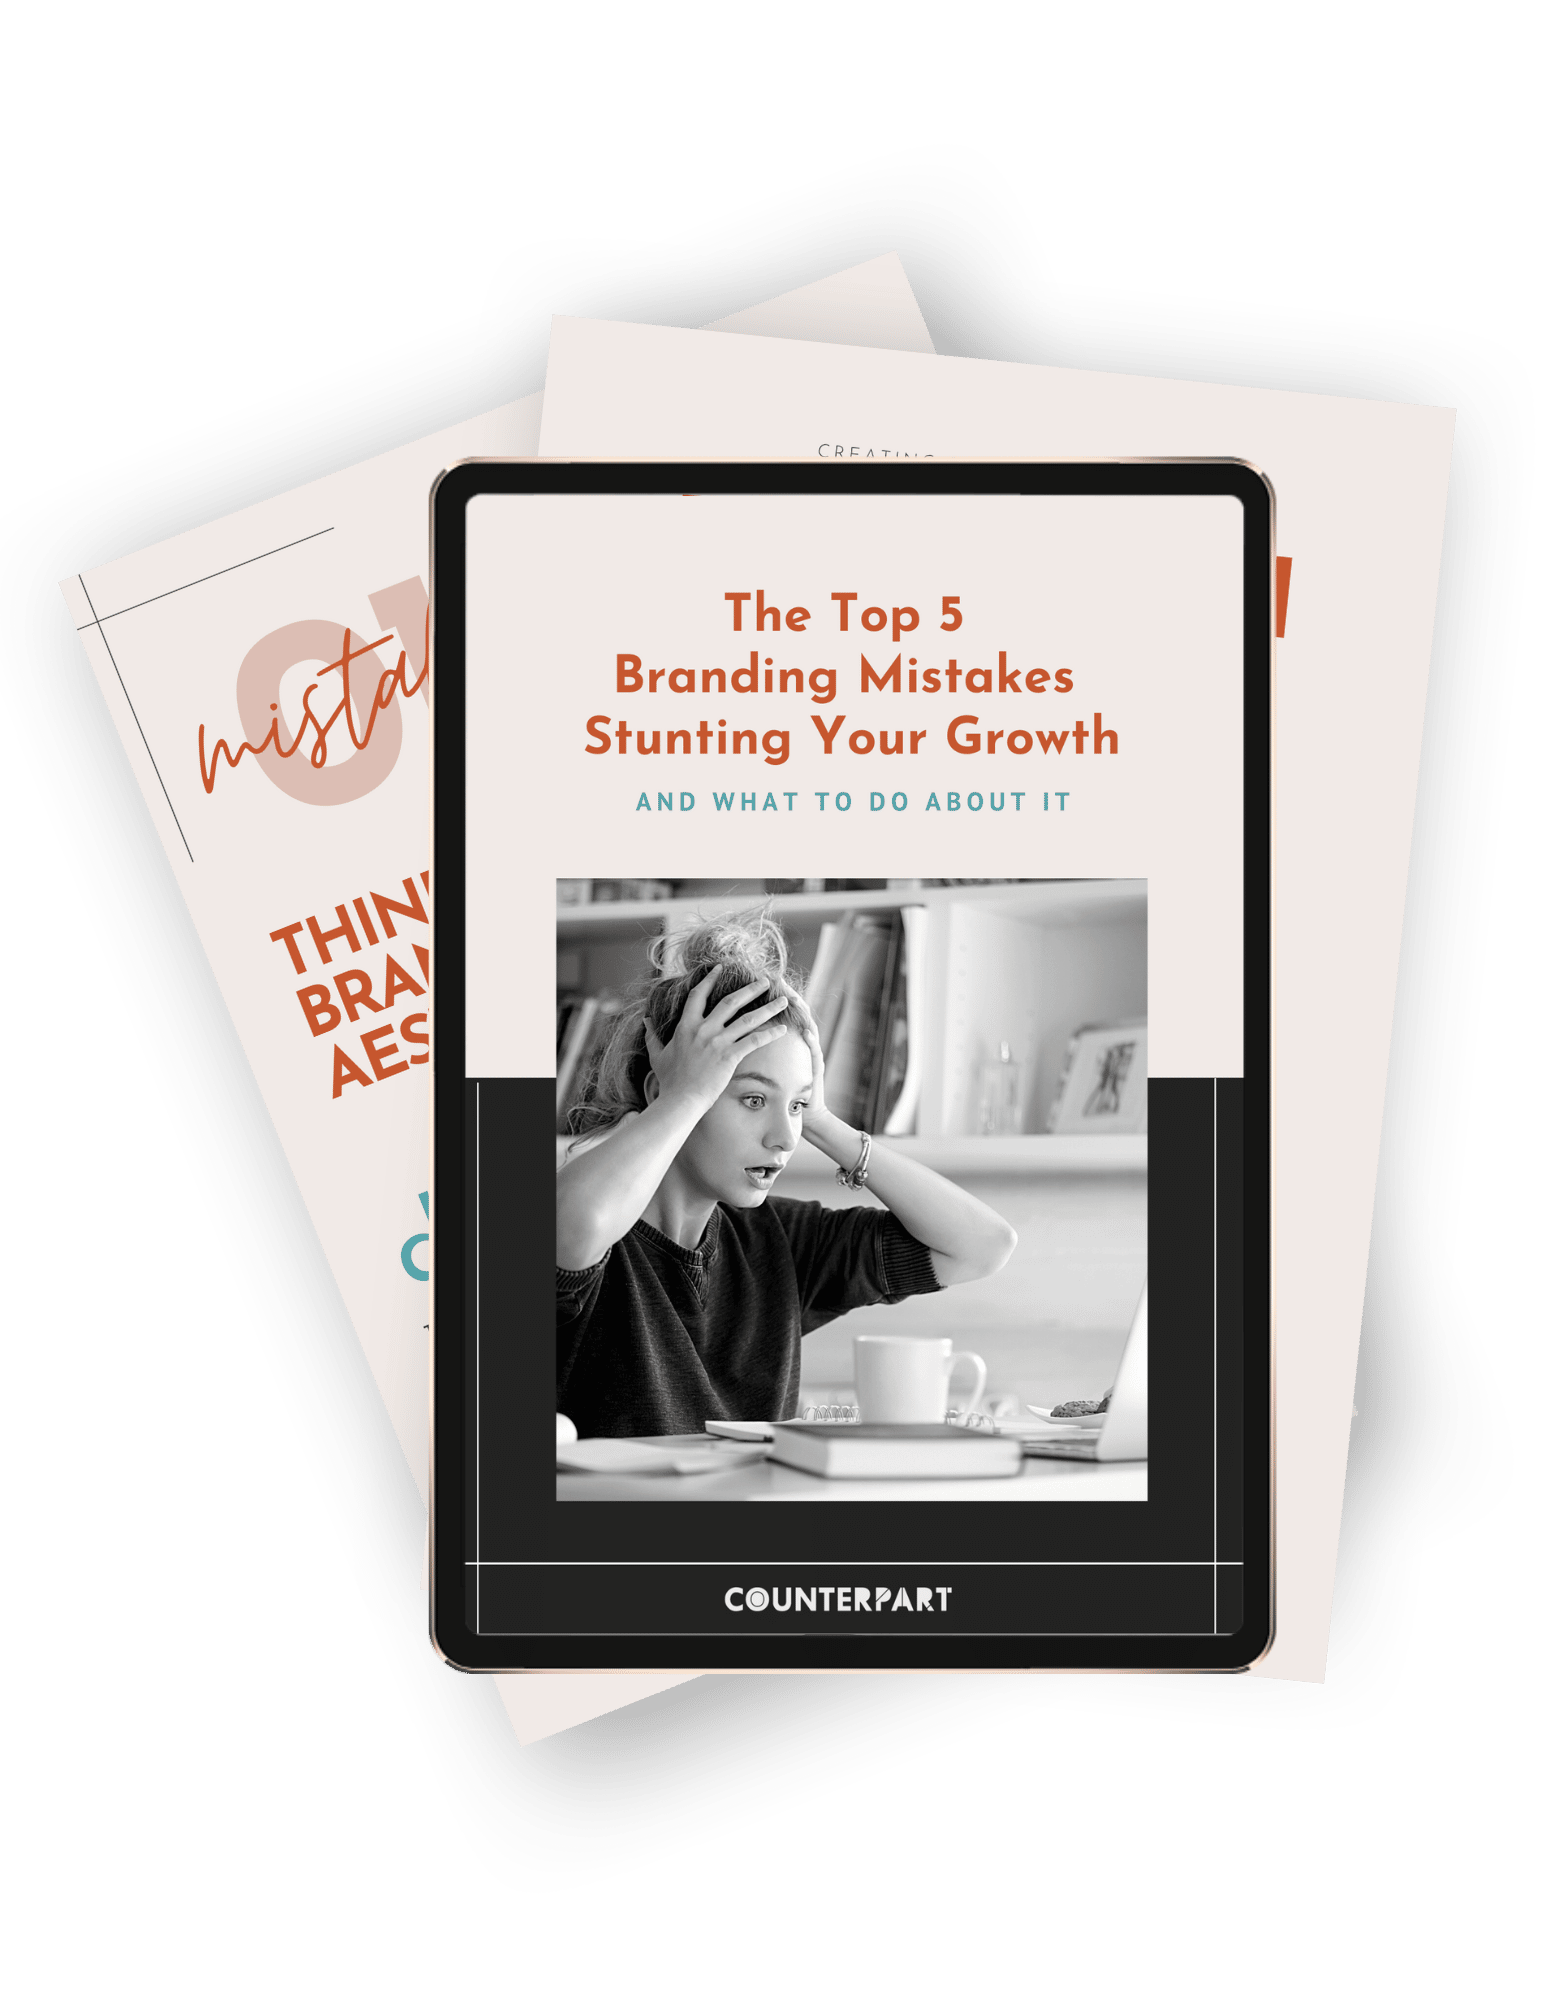 Top 5 Branding Mistakes Stunting Your Growth -ebook